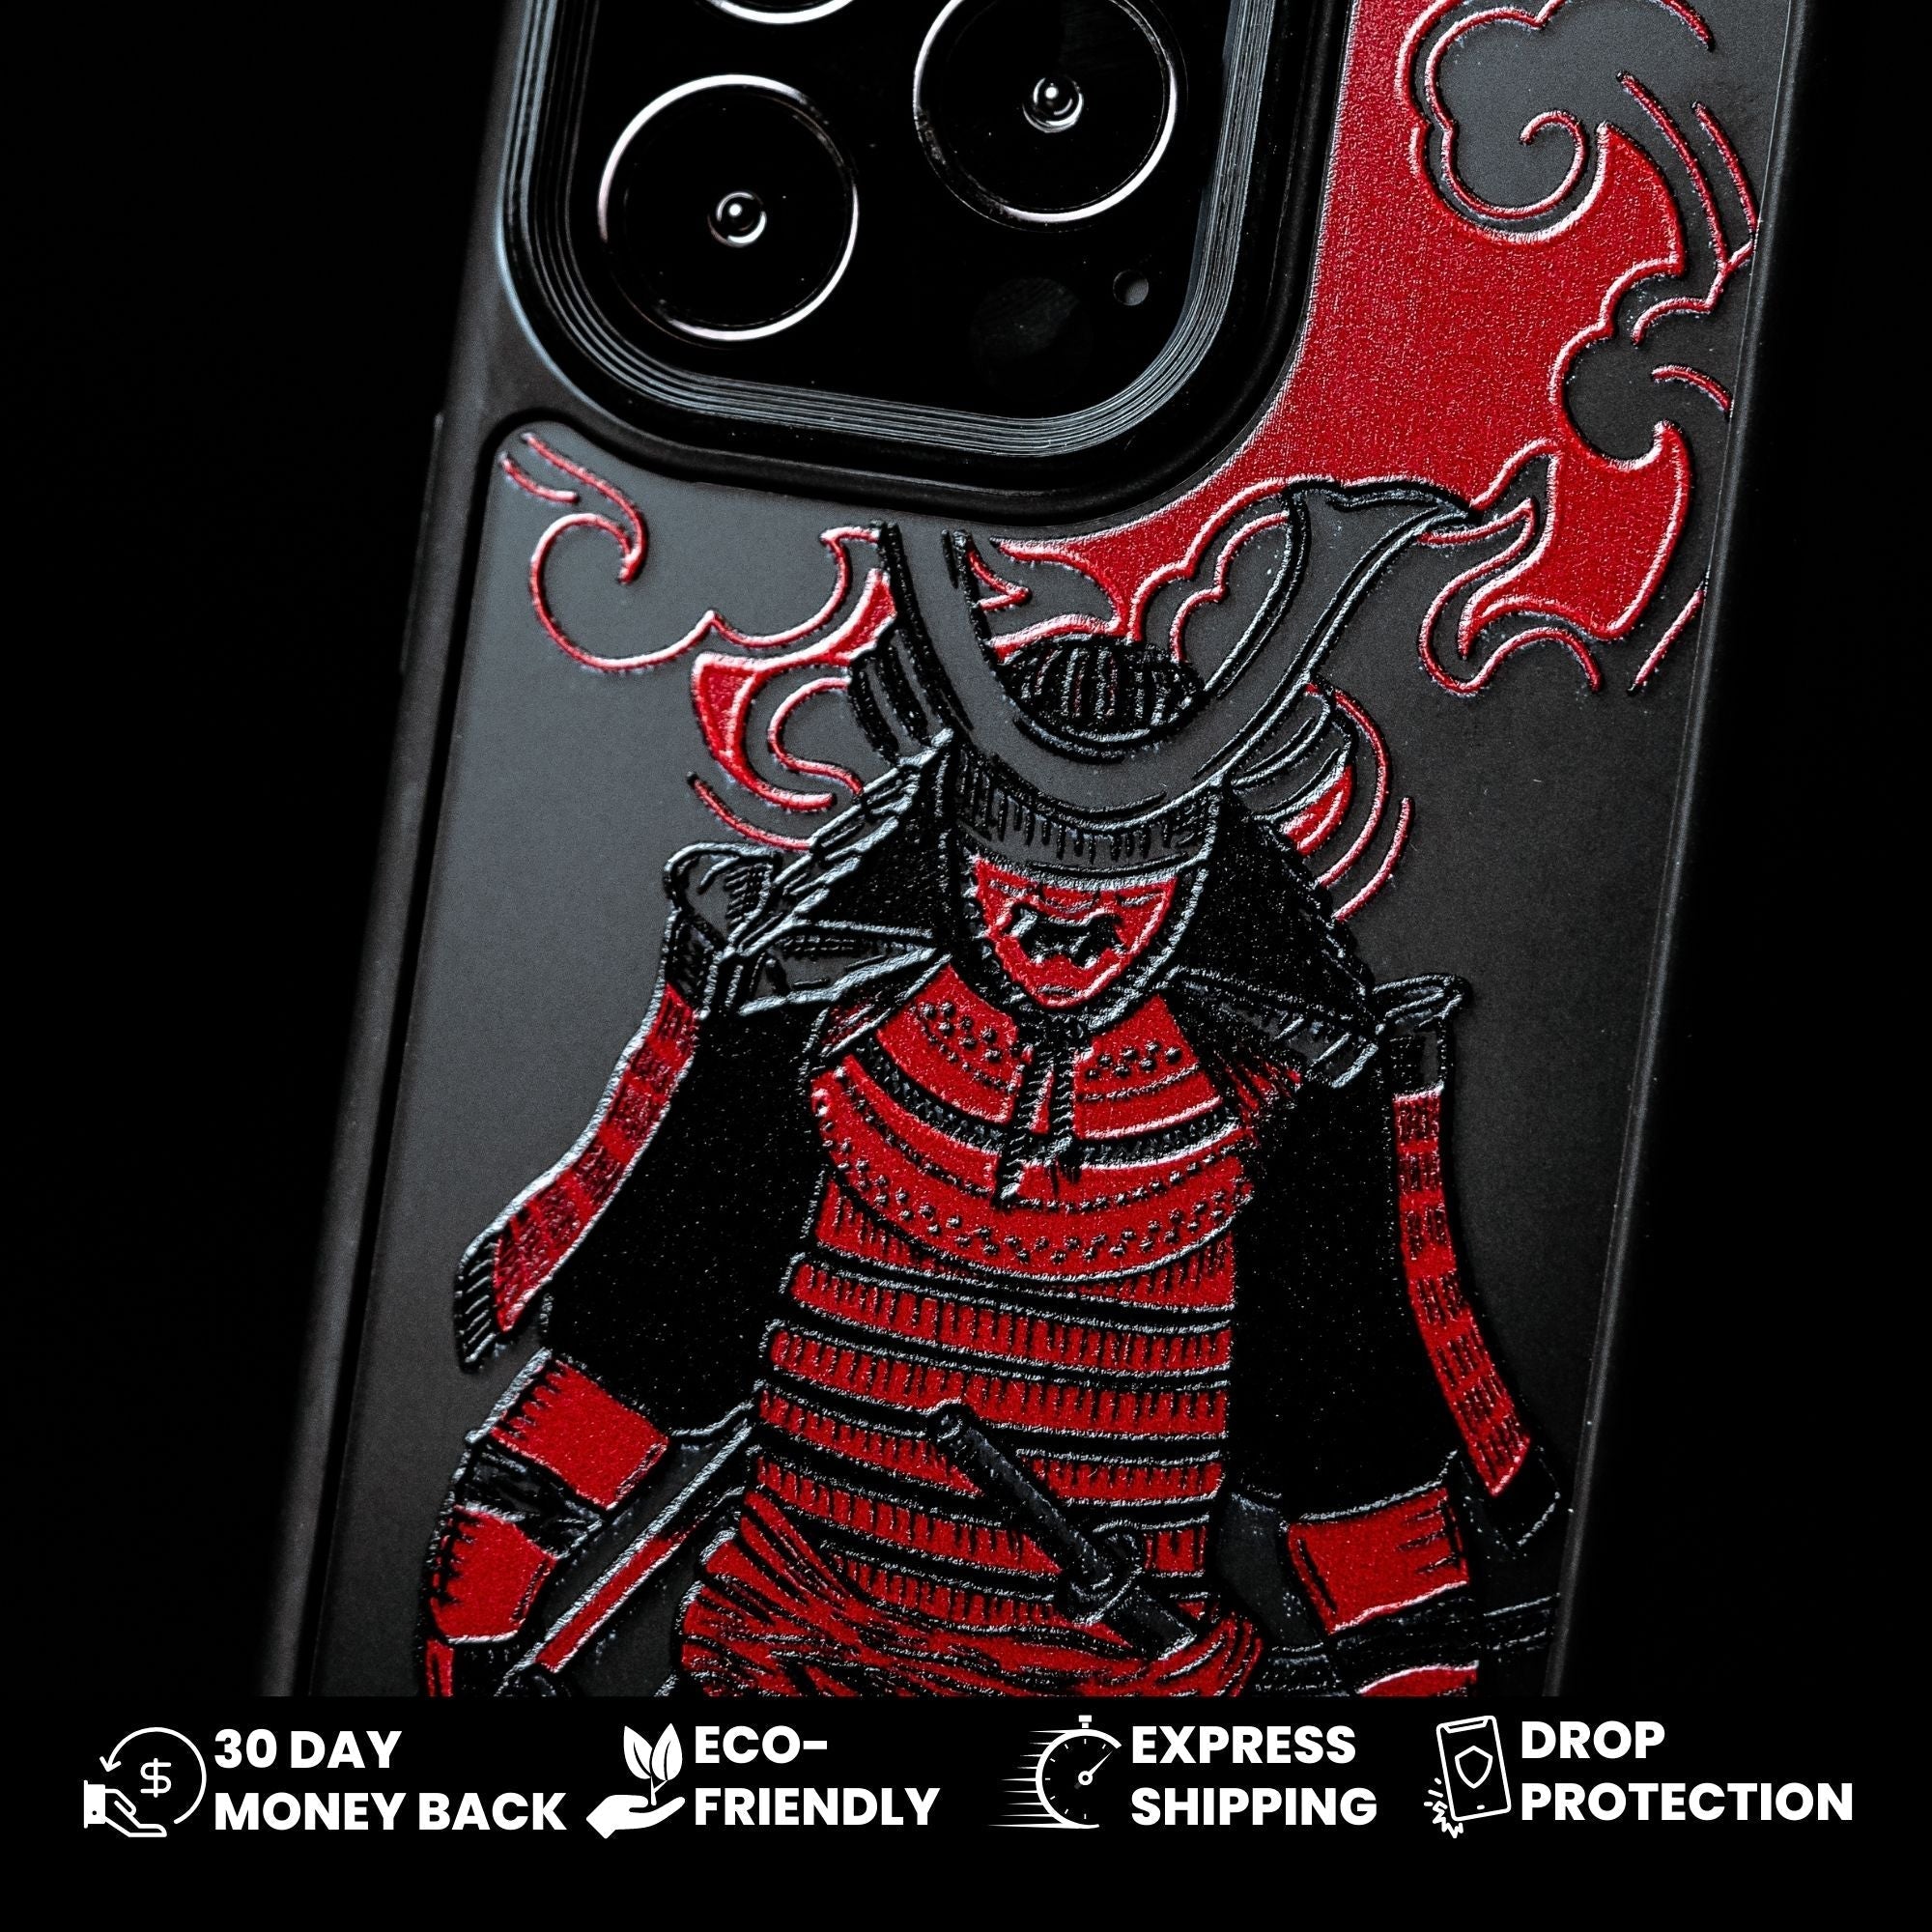 SINISTER Tough iPhone case